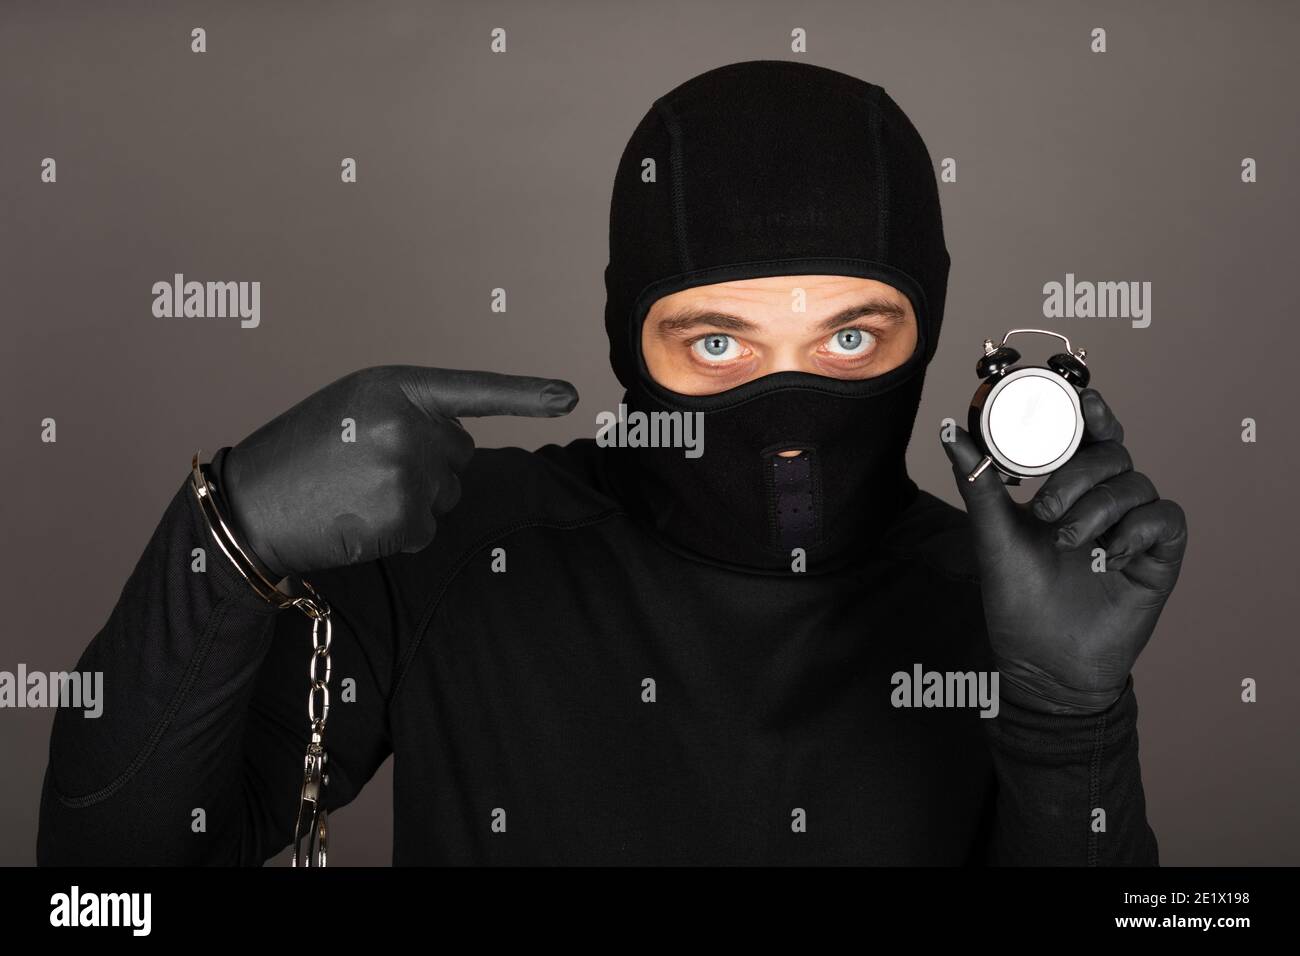 Picture of young man with black mask and outfit suspect of a robbery, wearing handcuffs in front of grey background Stock Photo